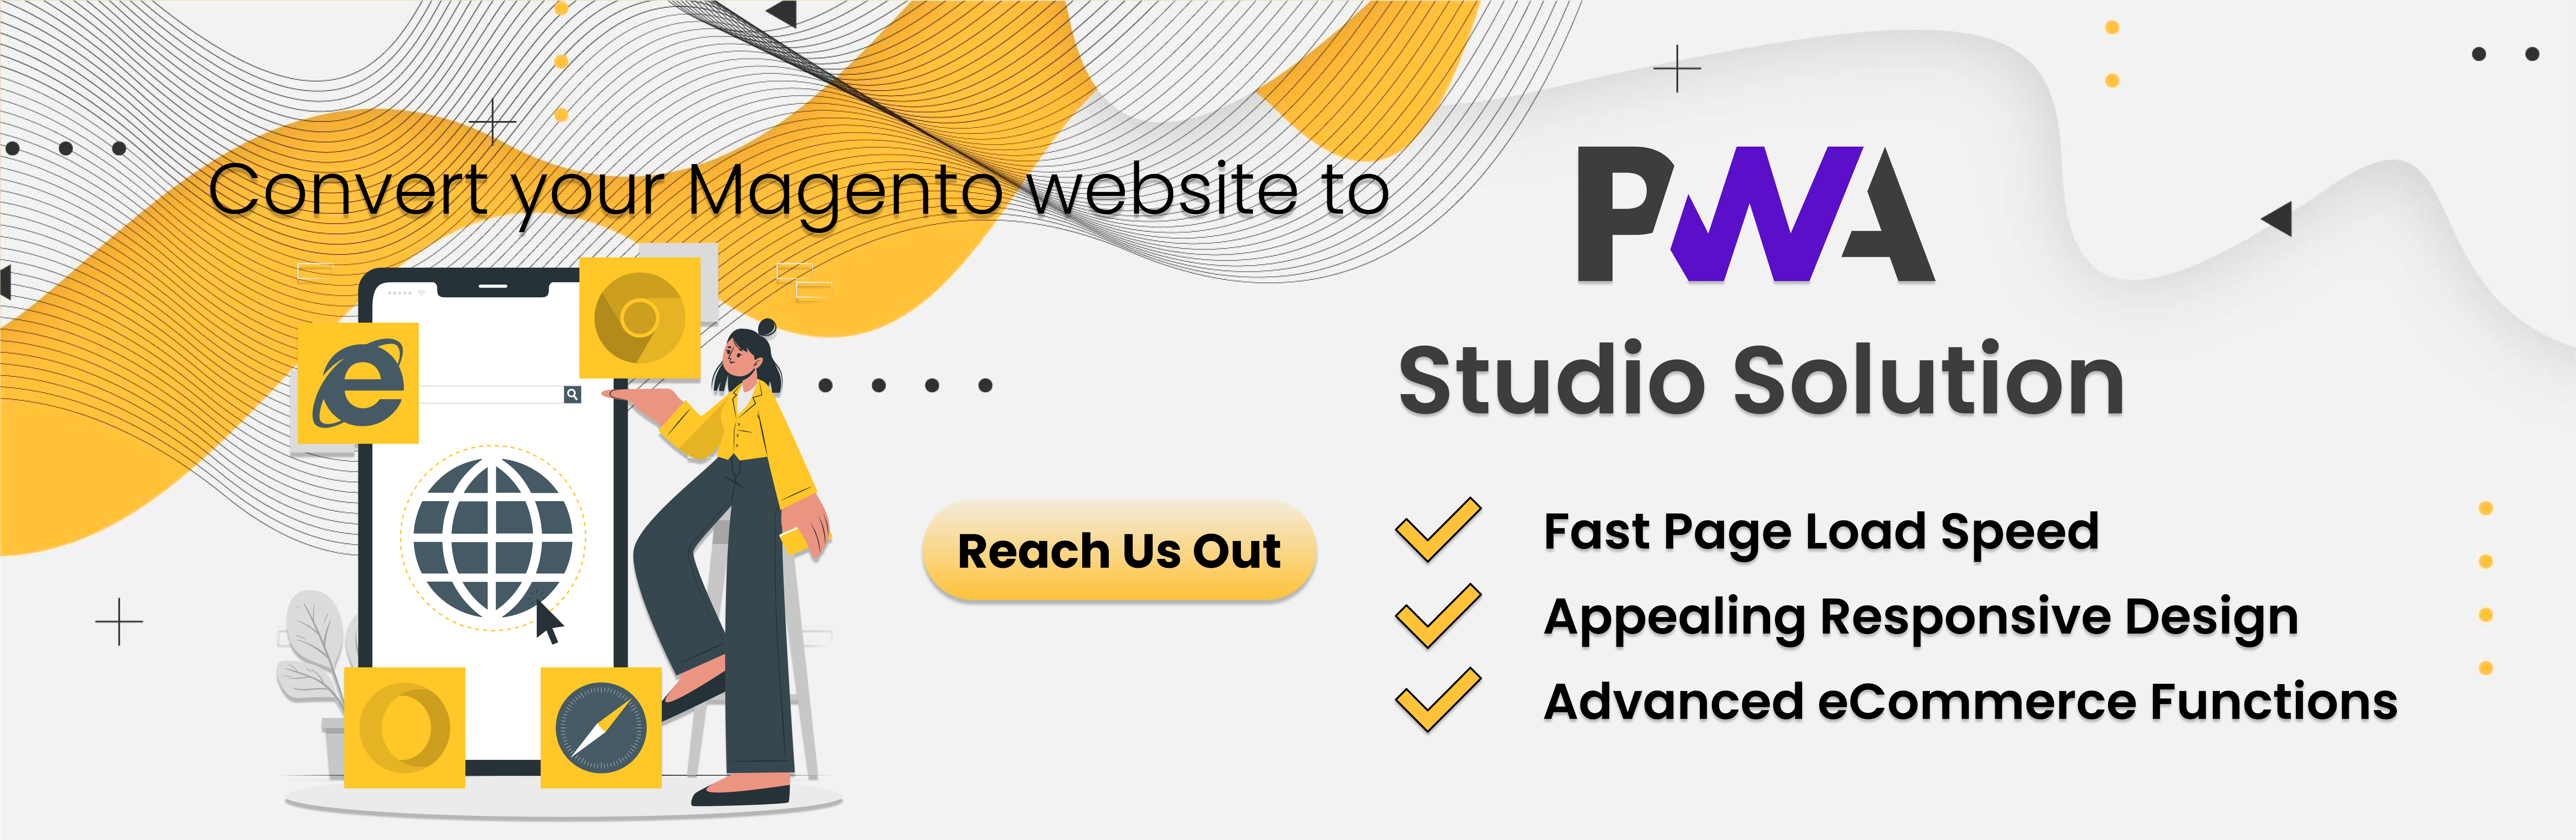 Convert Magento 2 Site to PWA Studio with our Solution